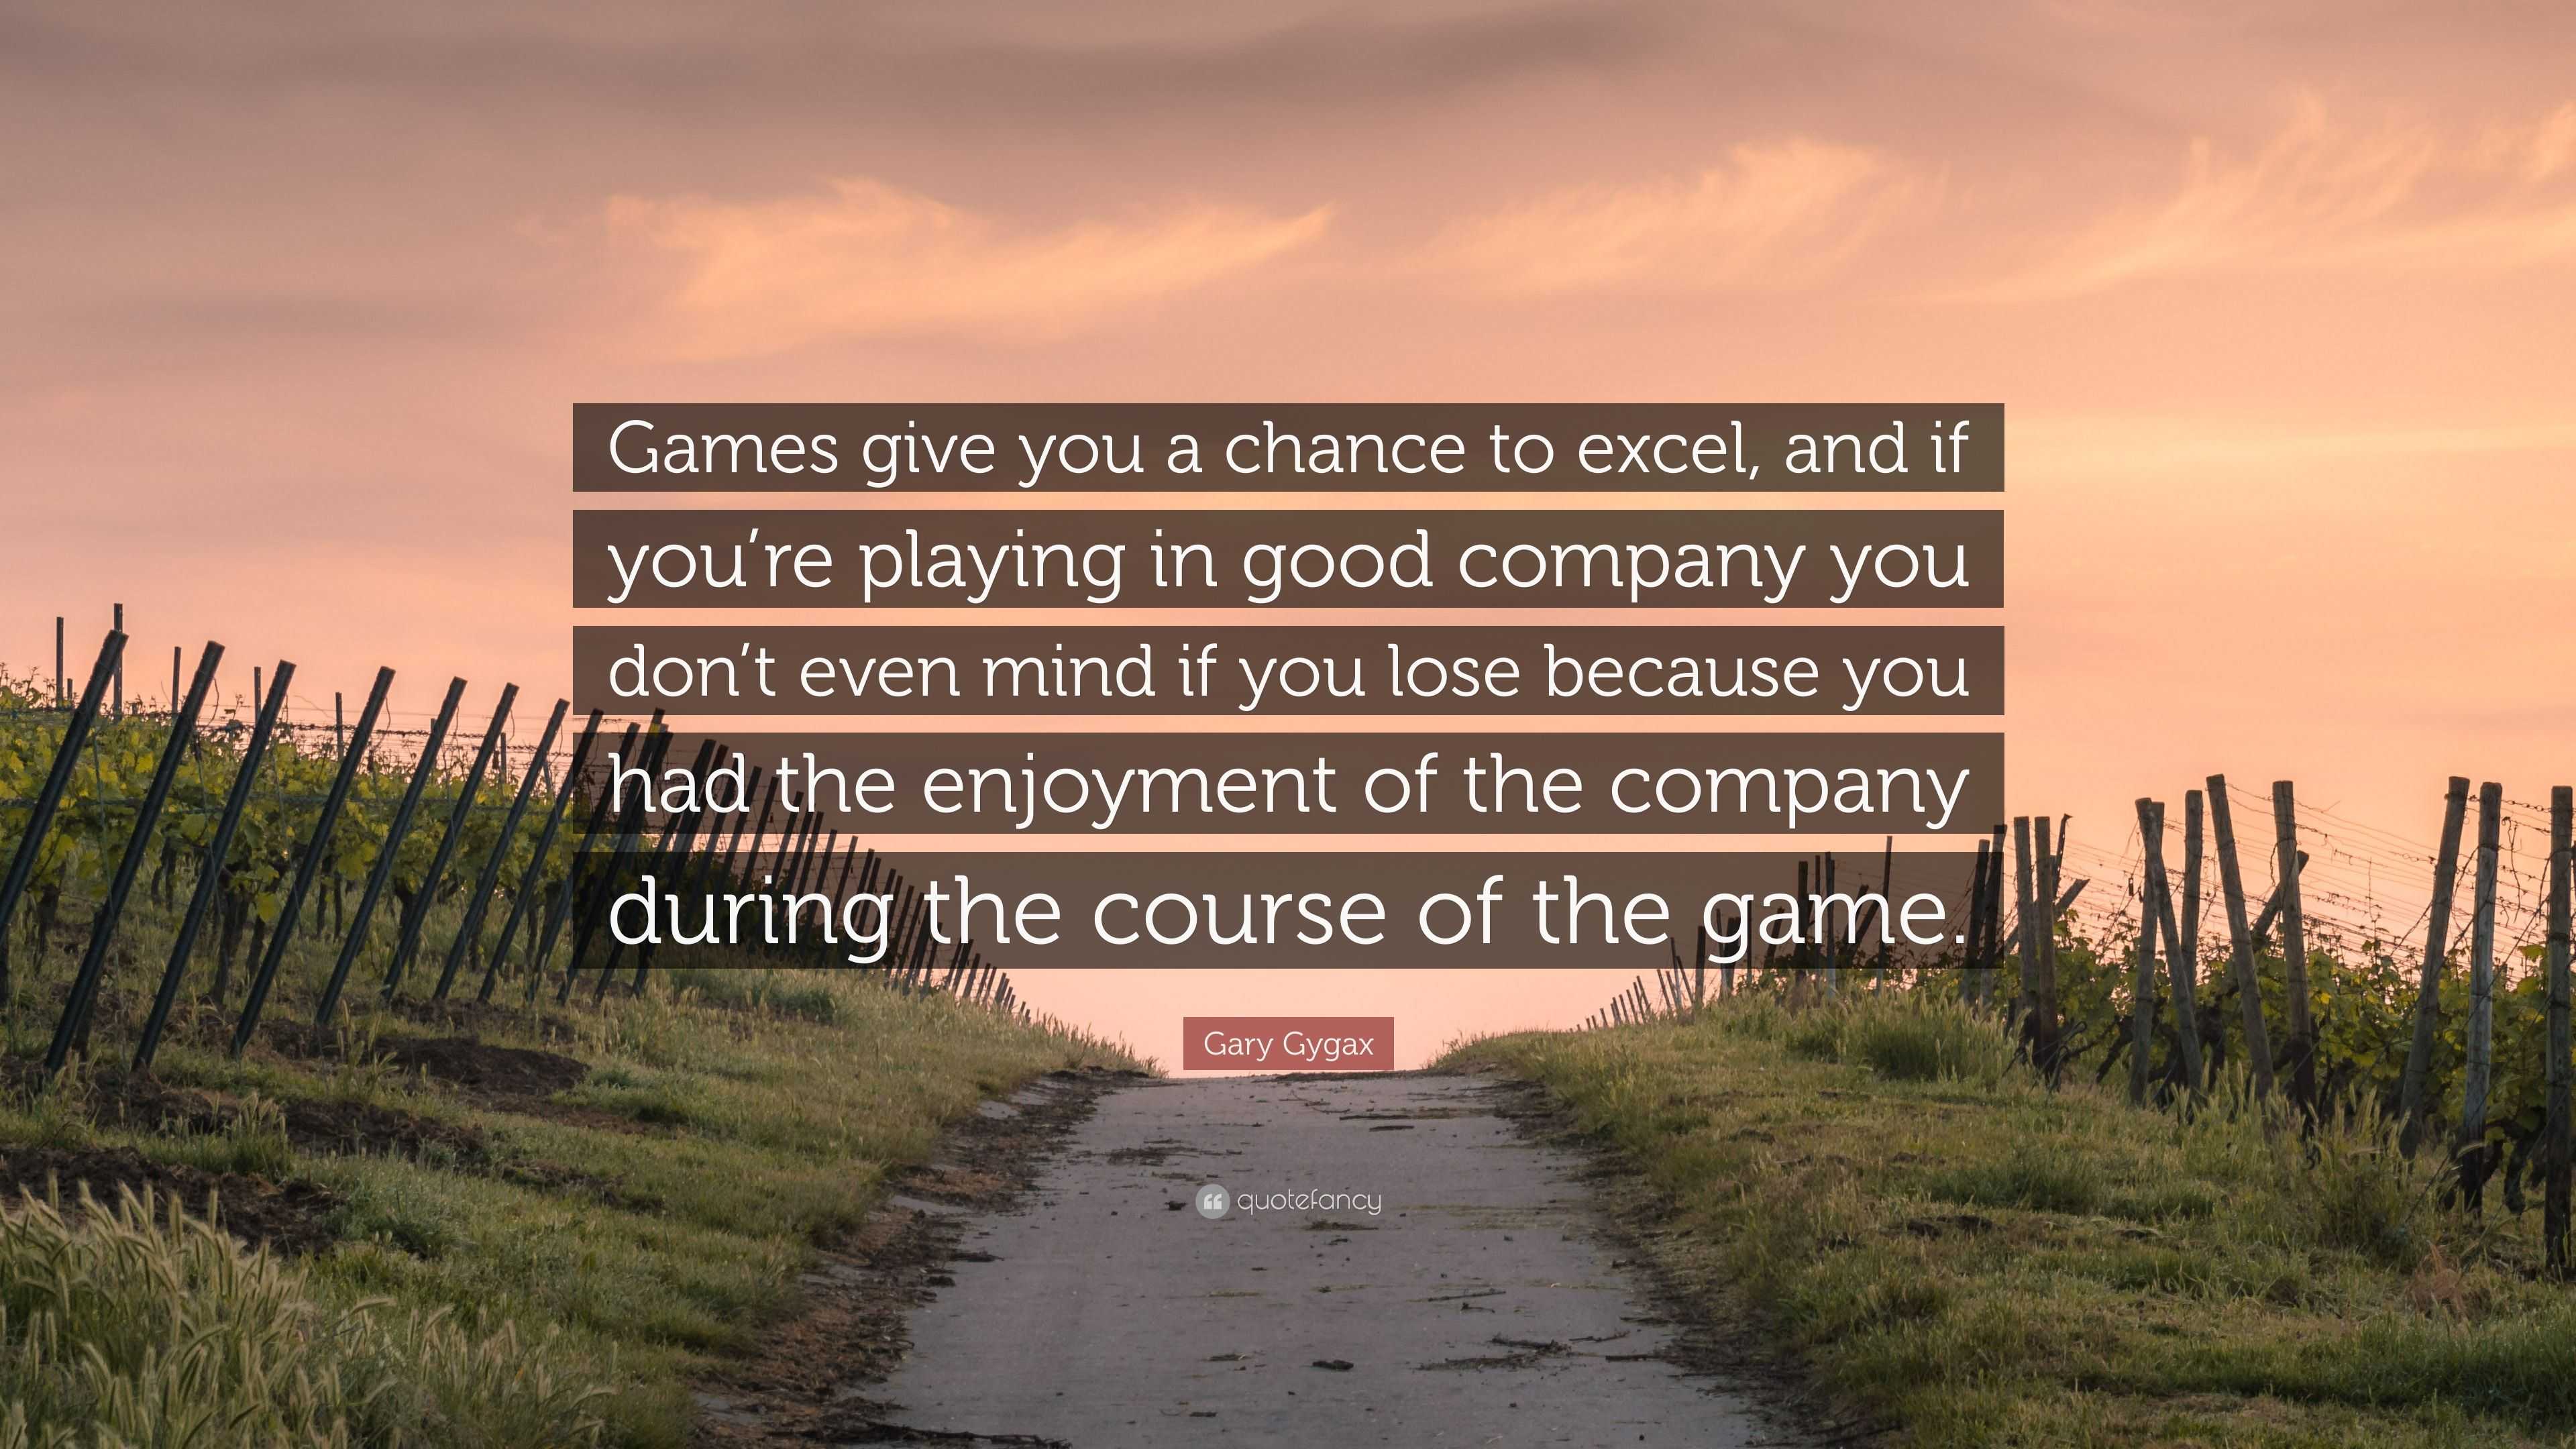 Games give you a chance to excel, and if